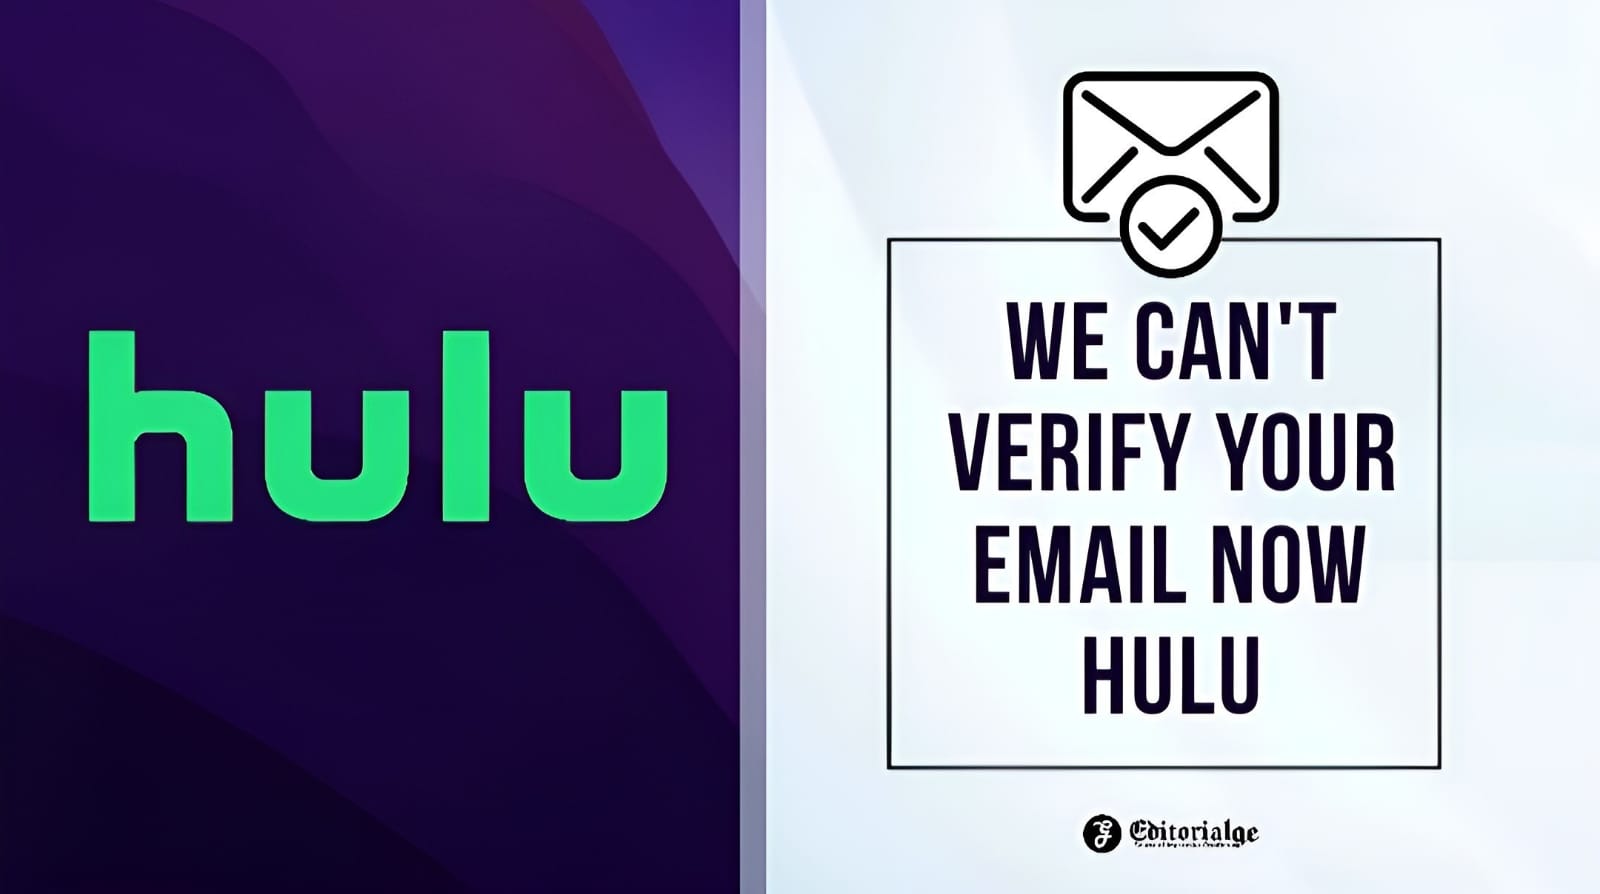 We can't verify your email now hulu